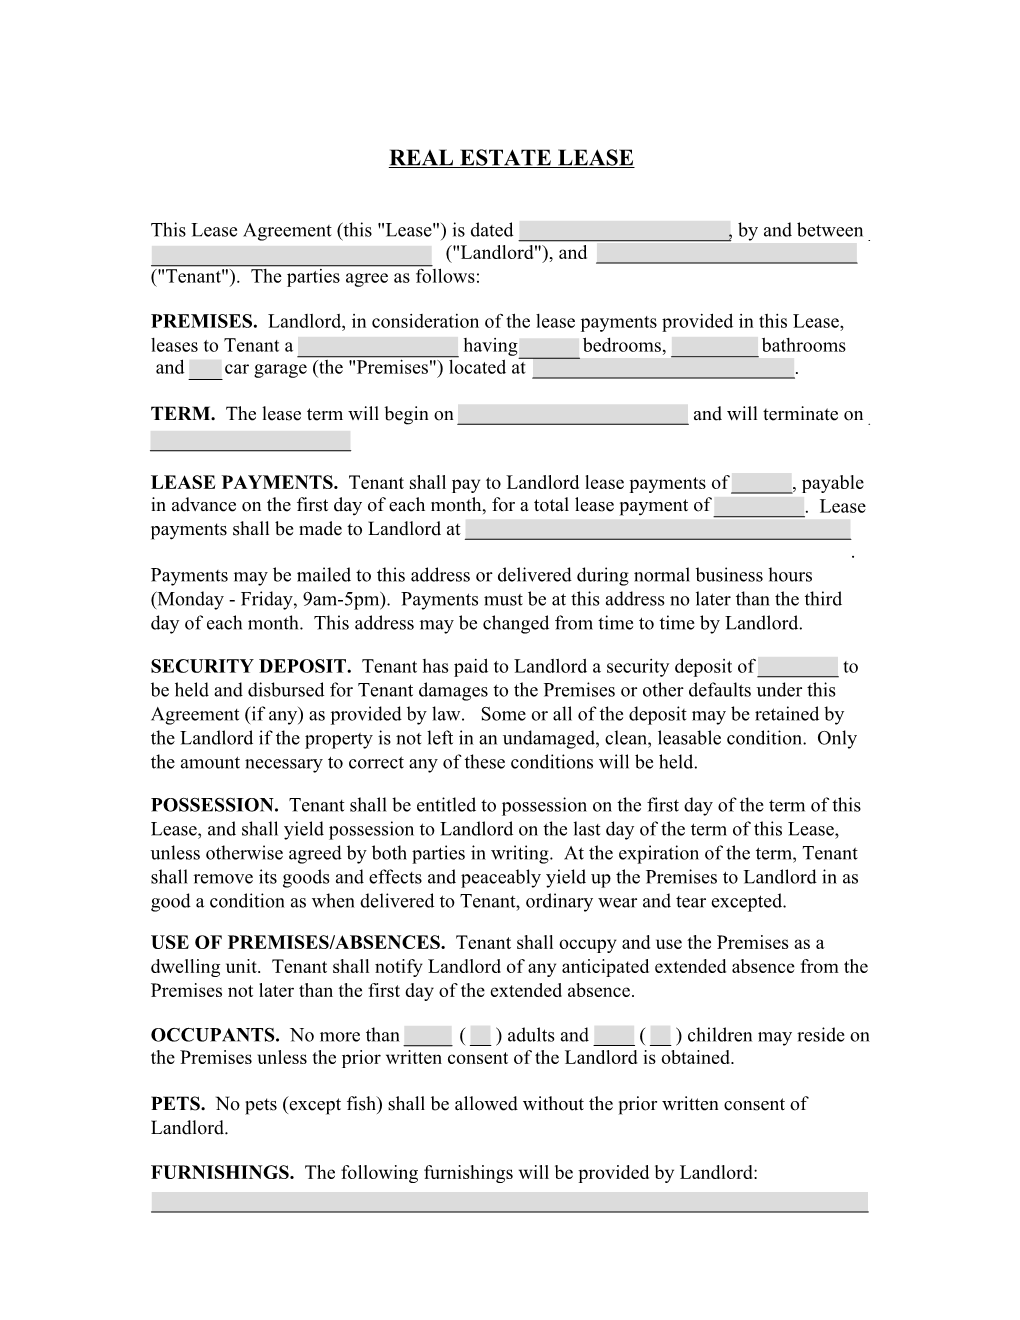 Real Estate Lease Agreement